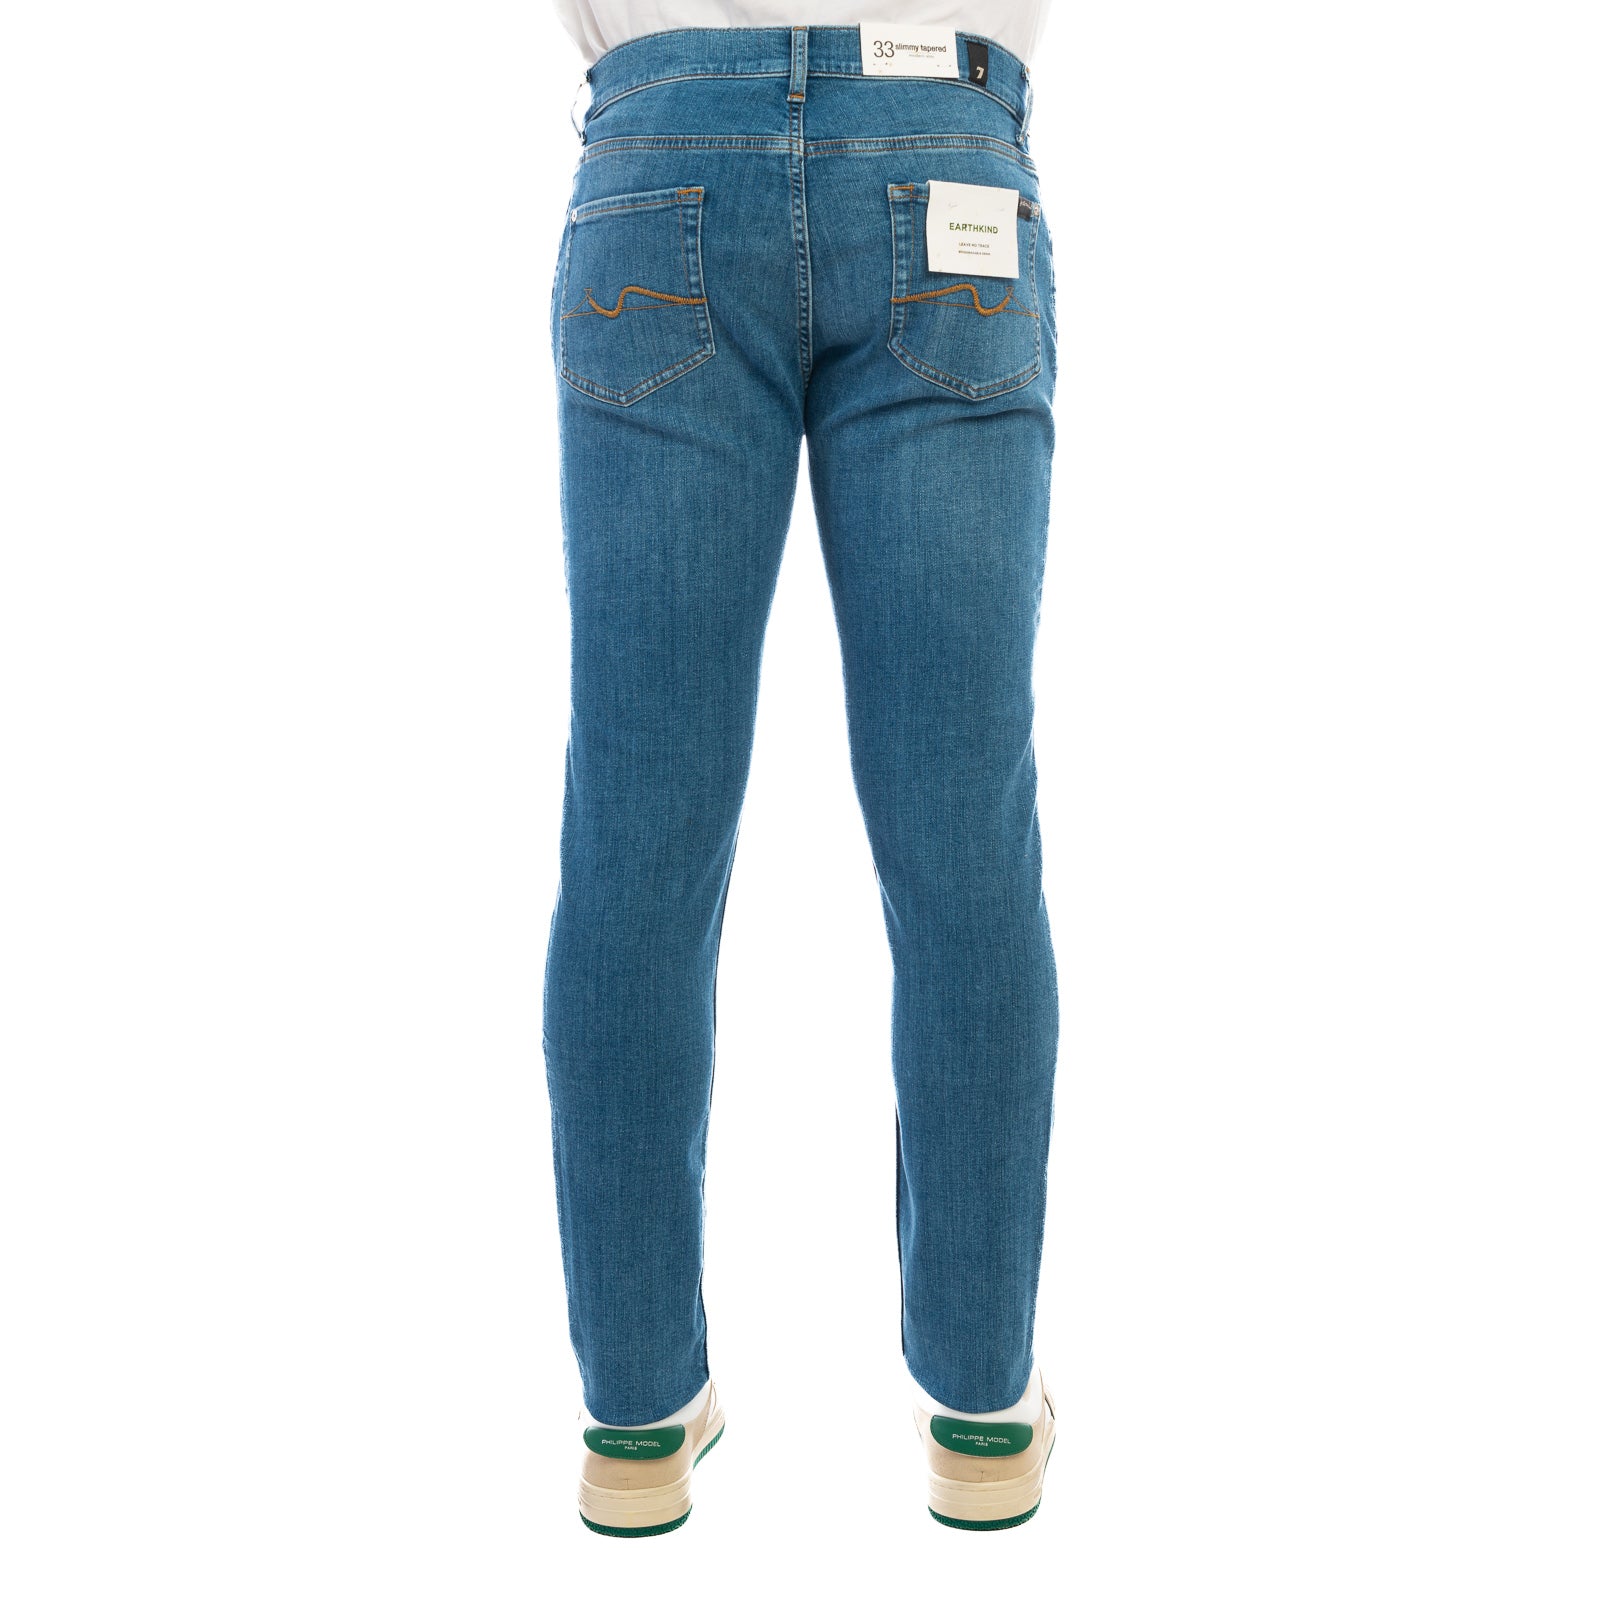 Jeans 7 FOR ALL MANKIND
Light blu